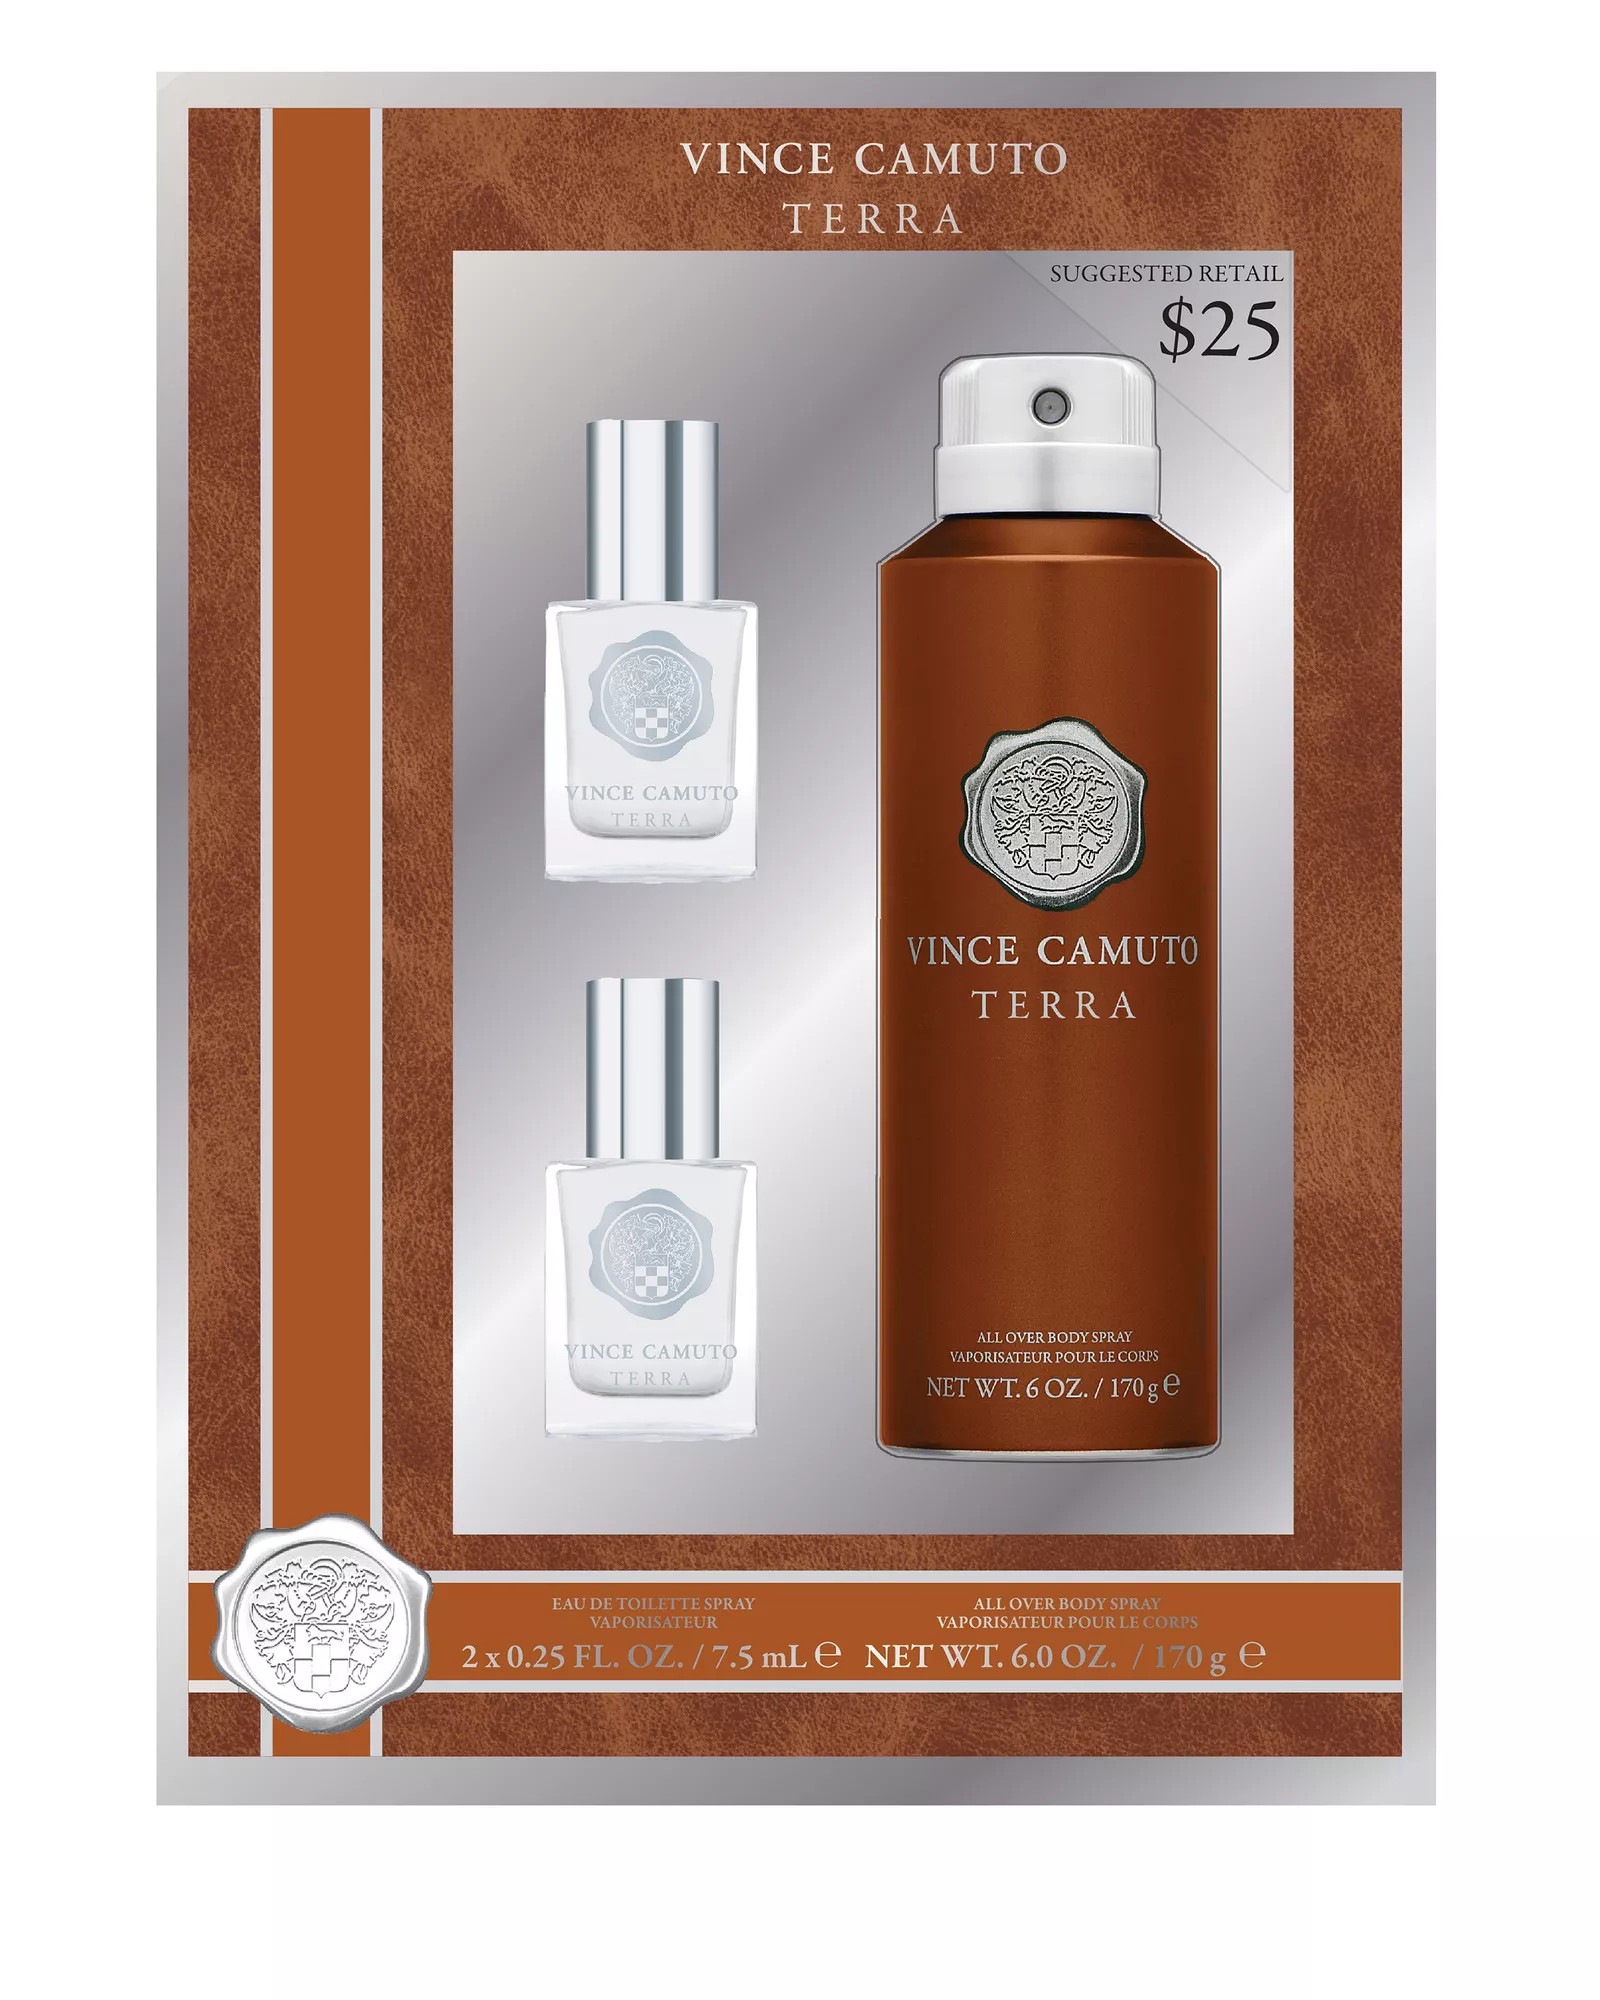 Vince Camuto Terra By Vince Camuto, Perfume & Cologne